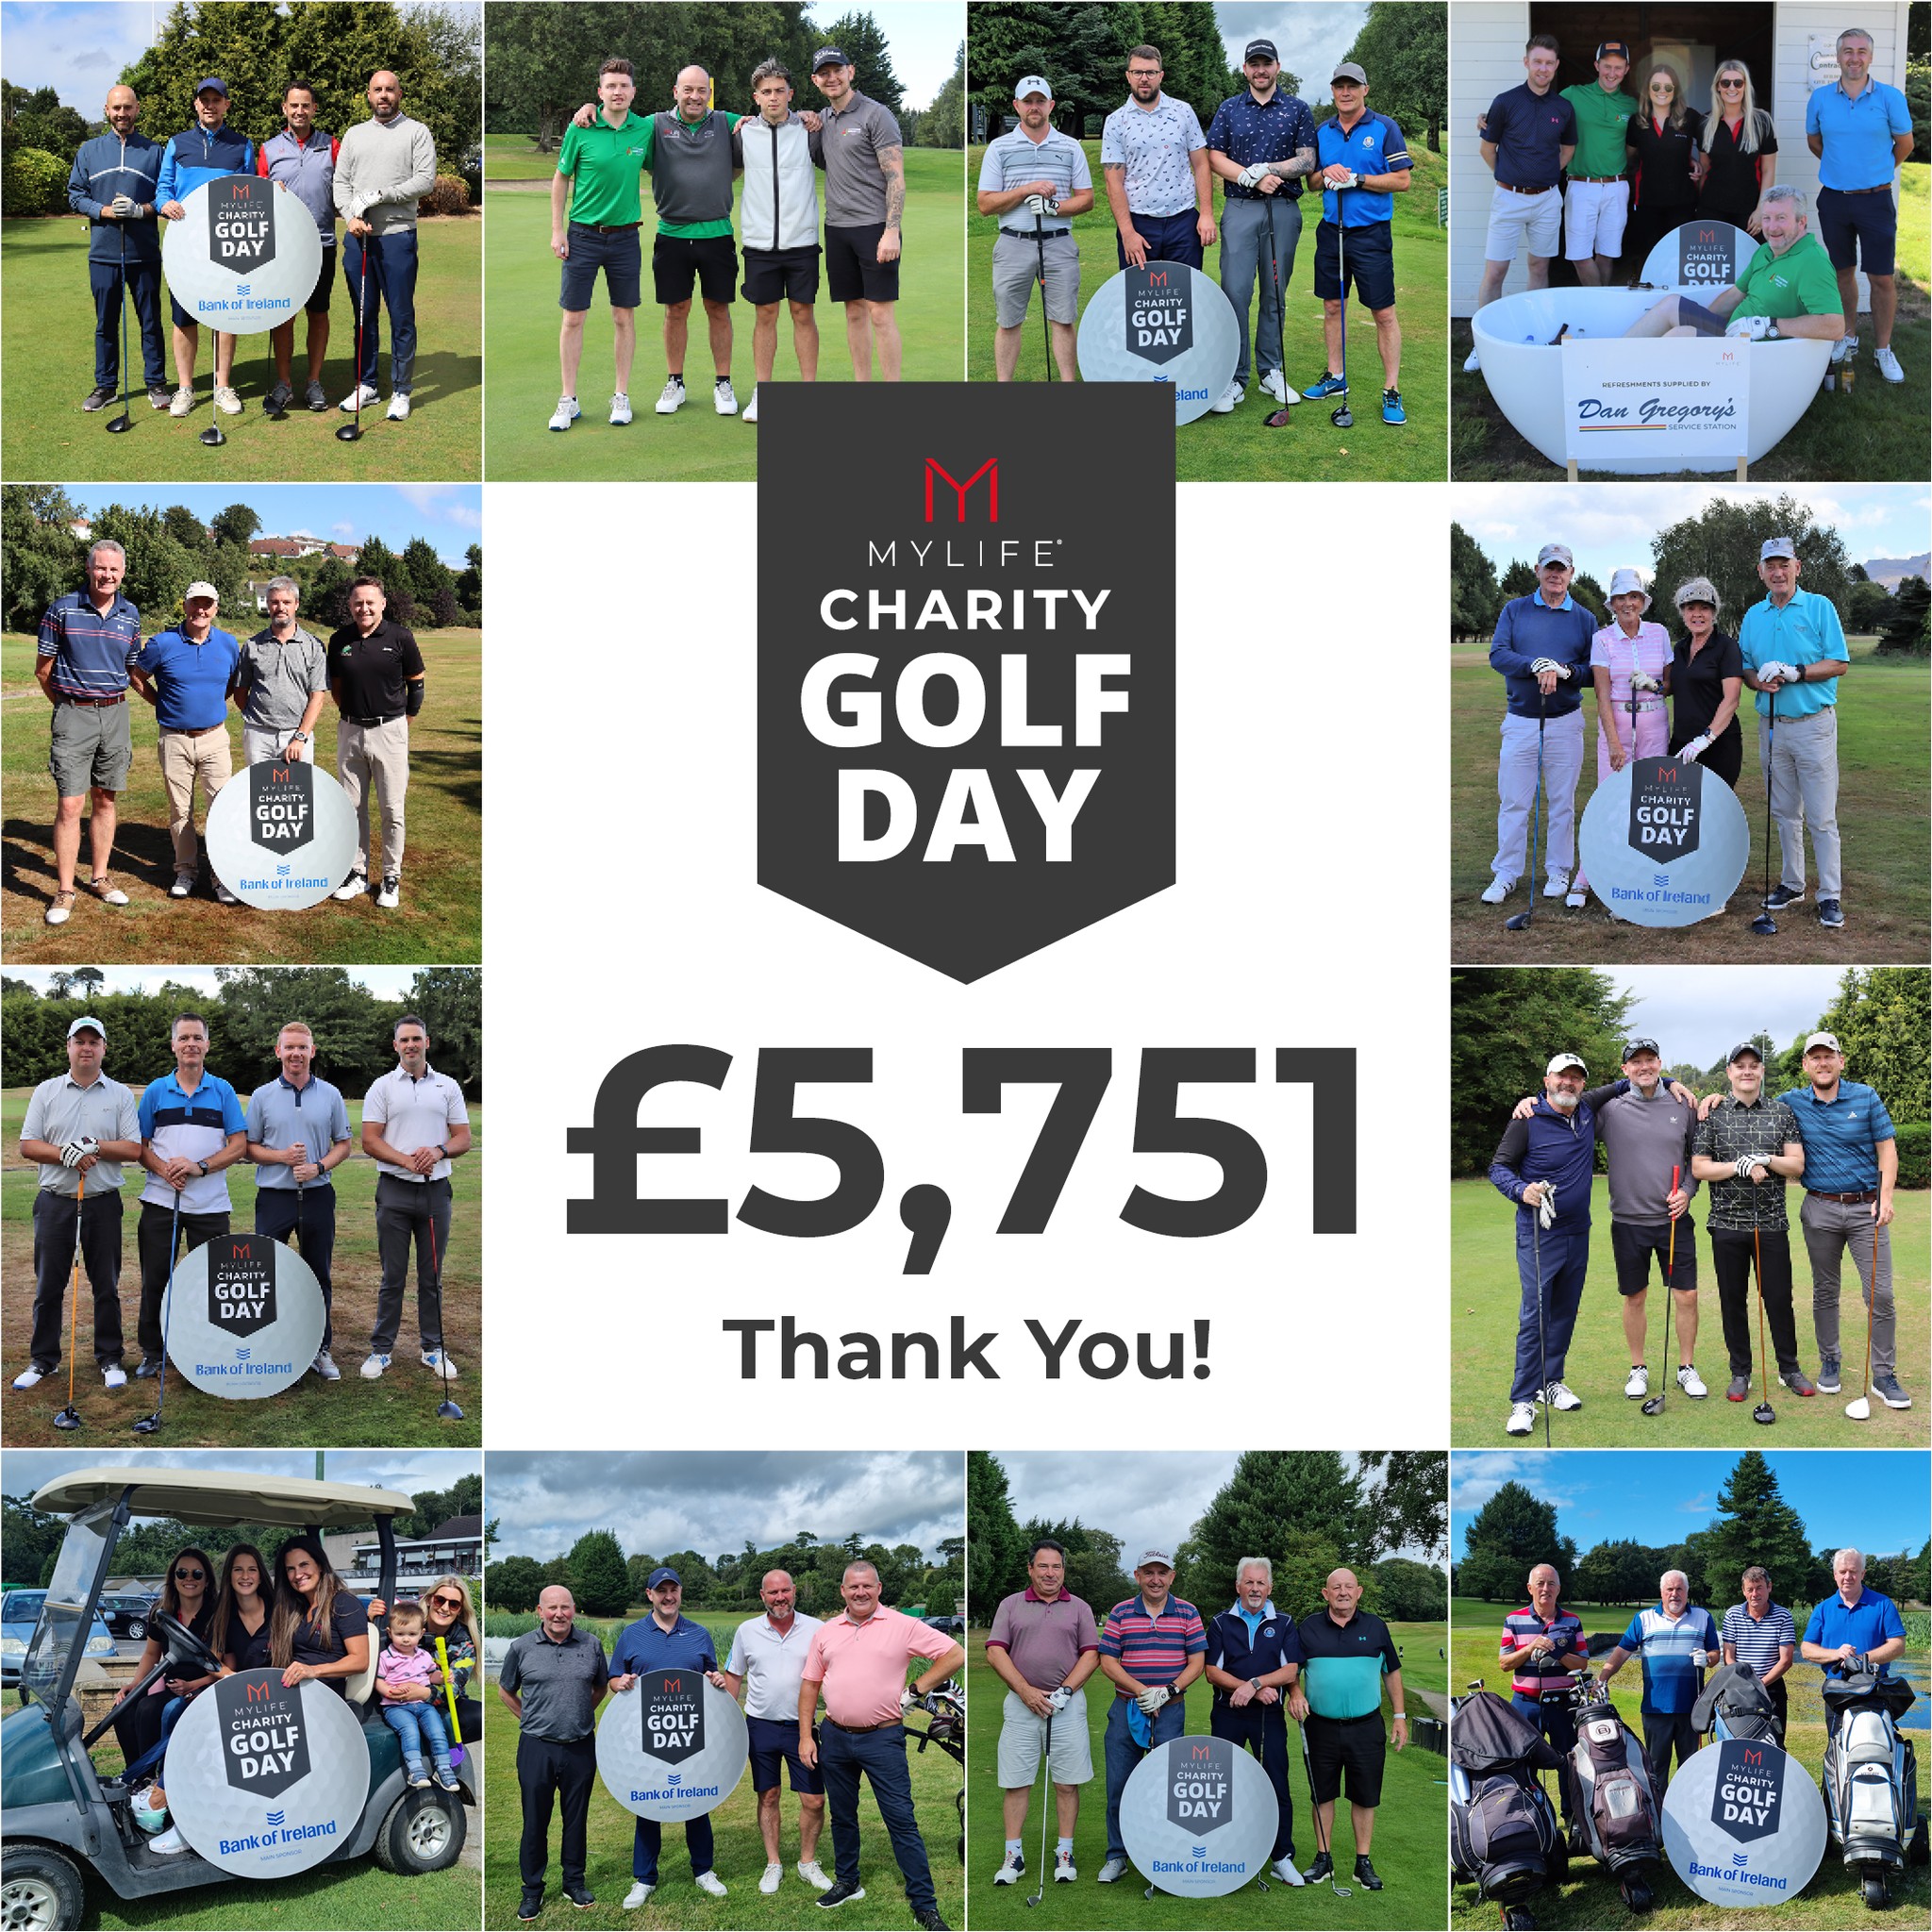 MyLife Charity Golf Day – Thank You!